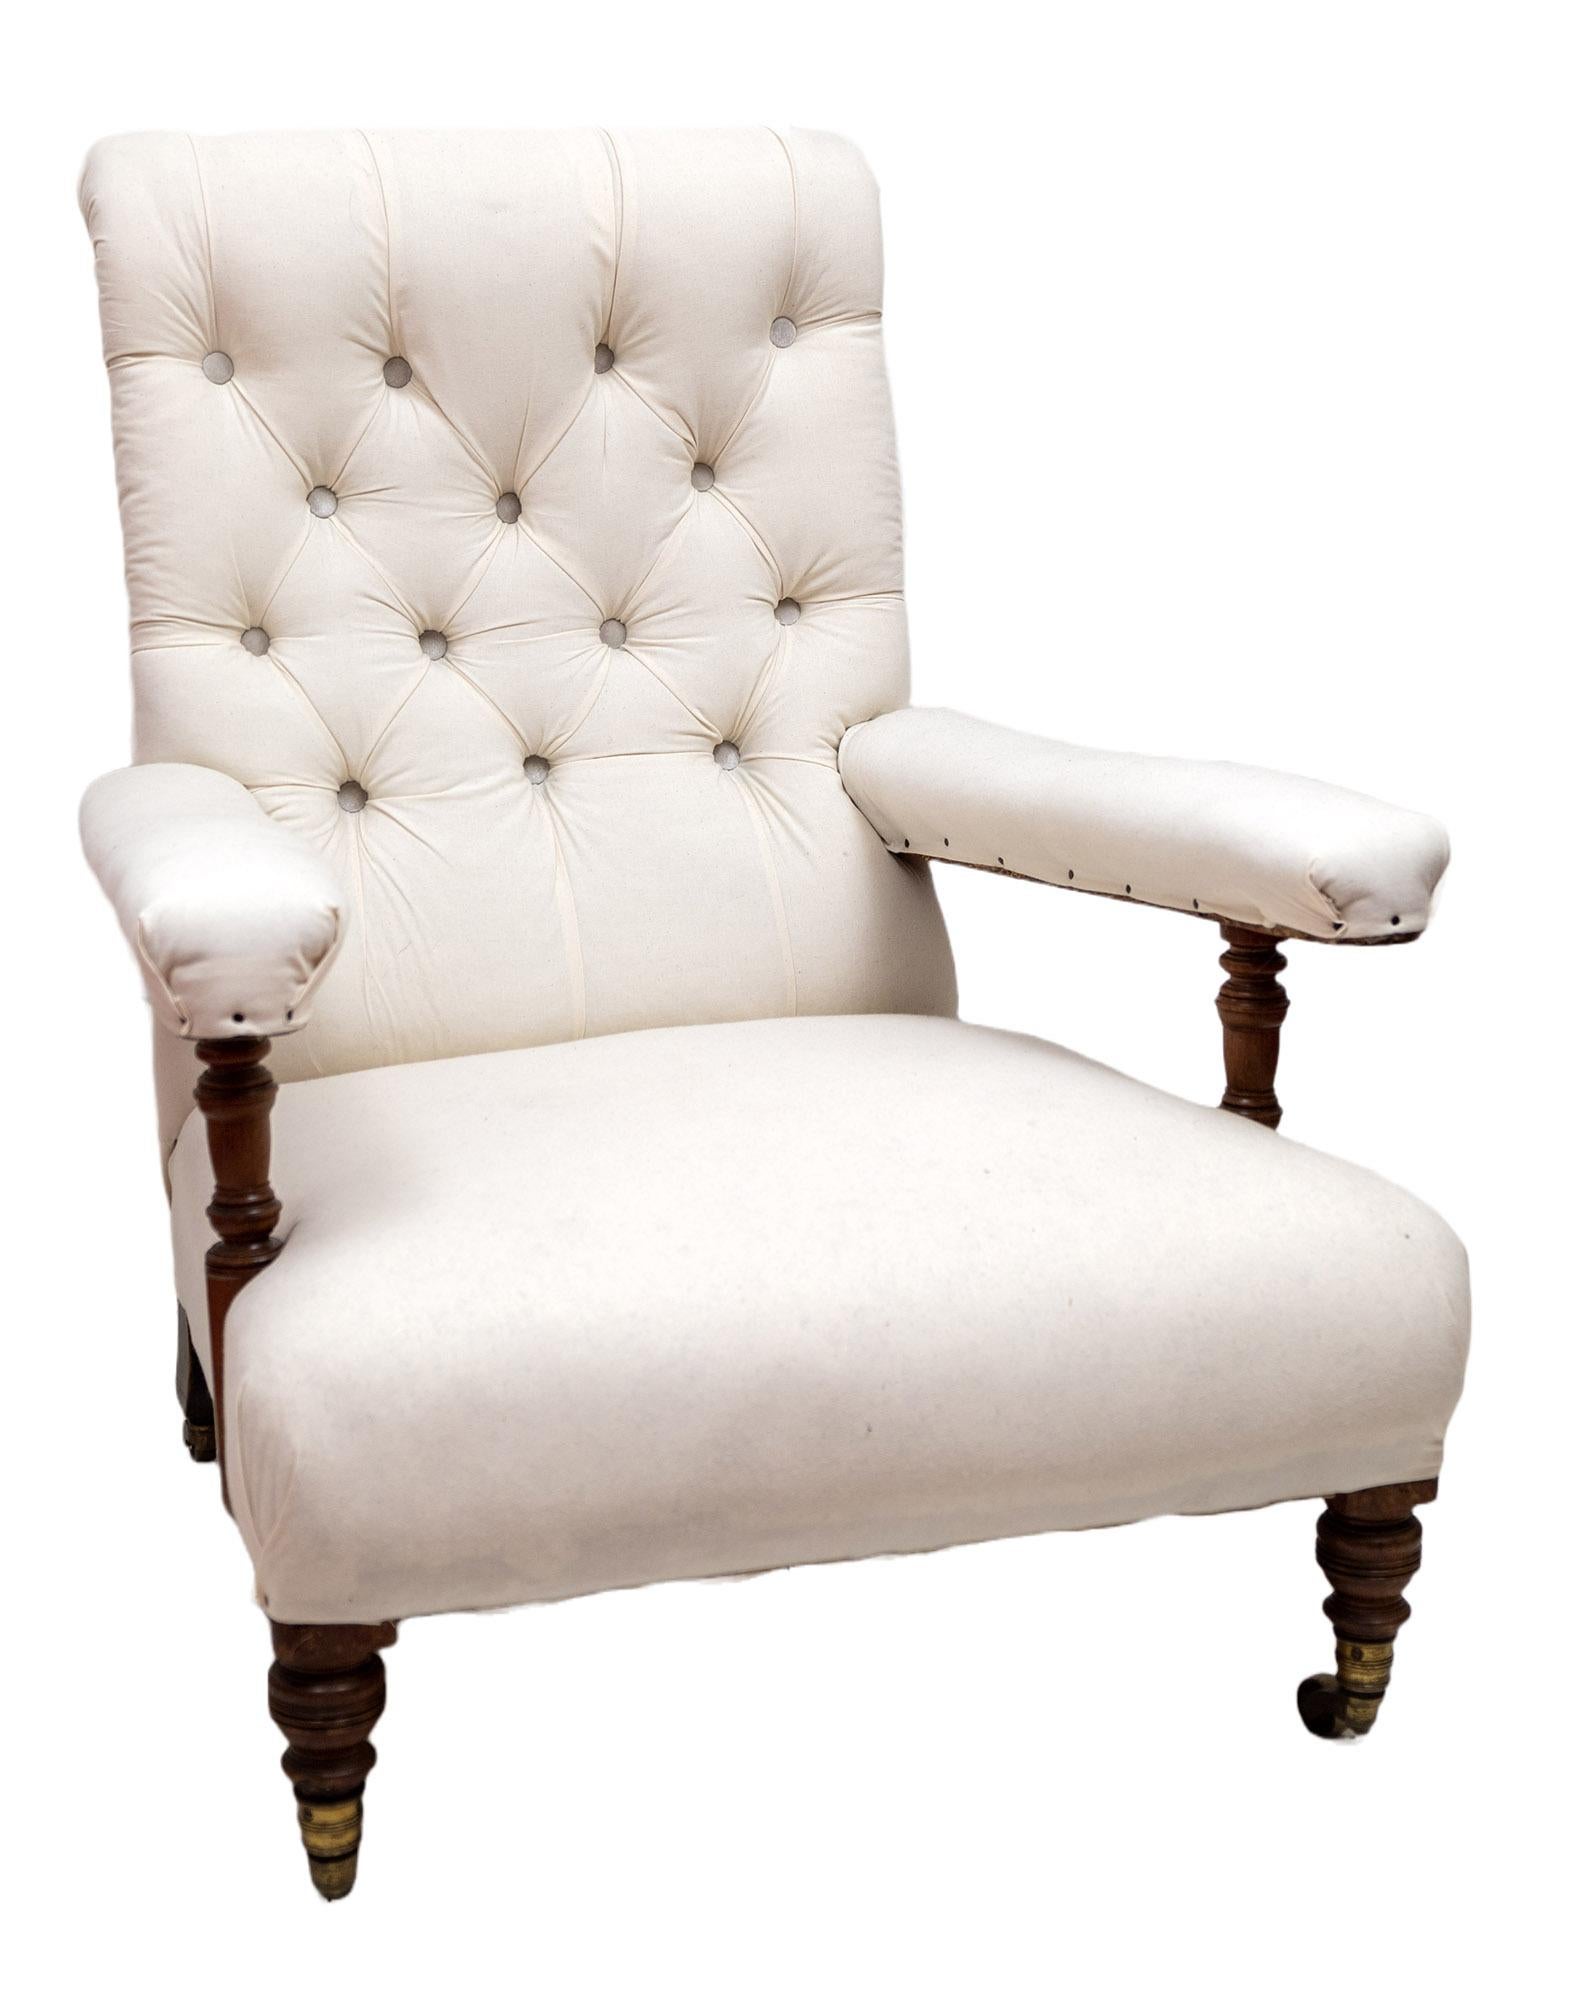 Each with turned walnut legs, and turned walnut supports under the armrest, upholstered in white calico with deep button-back detailing and horsehair stuffing. The brass castors stamped 'HOWARD AND SONS', and the back legs stamped 'HOWARD AND SONS'